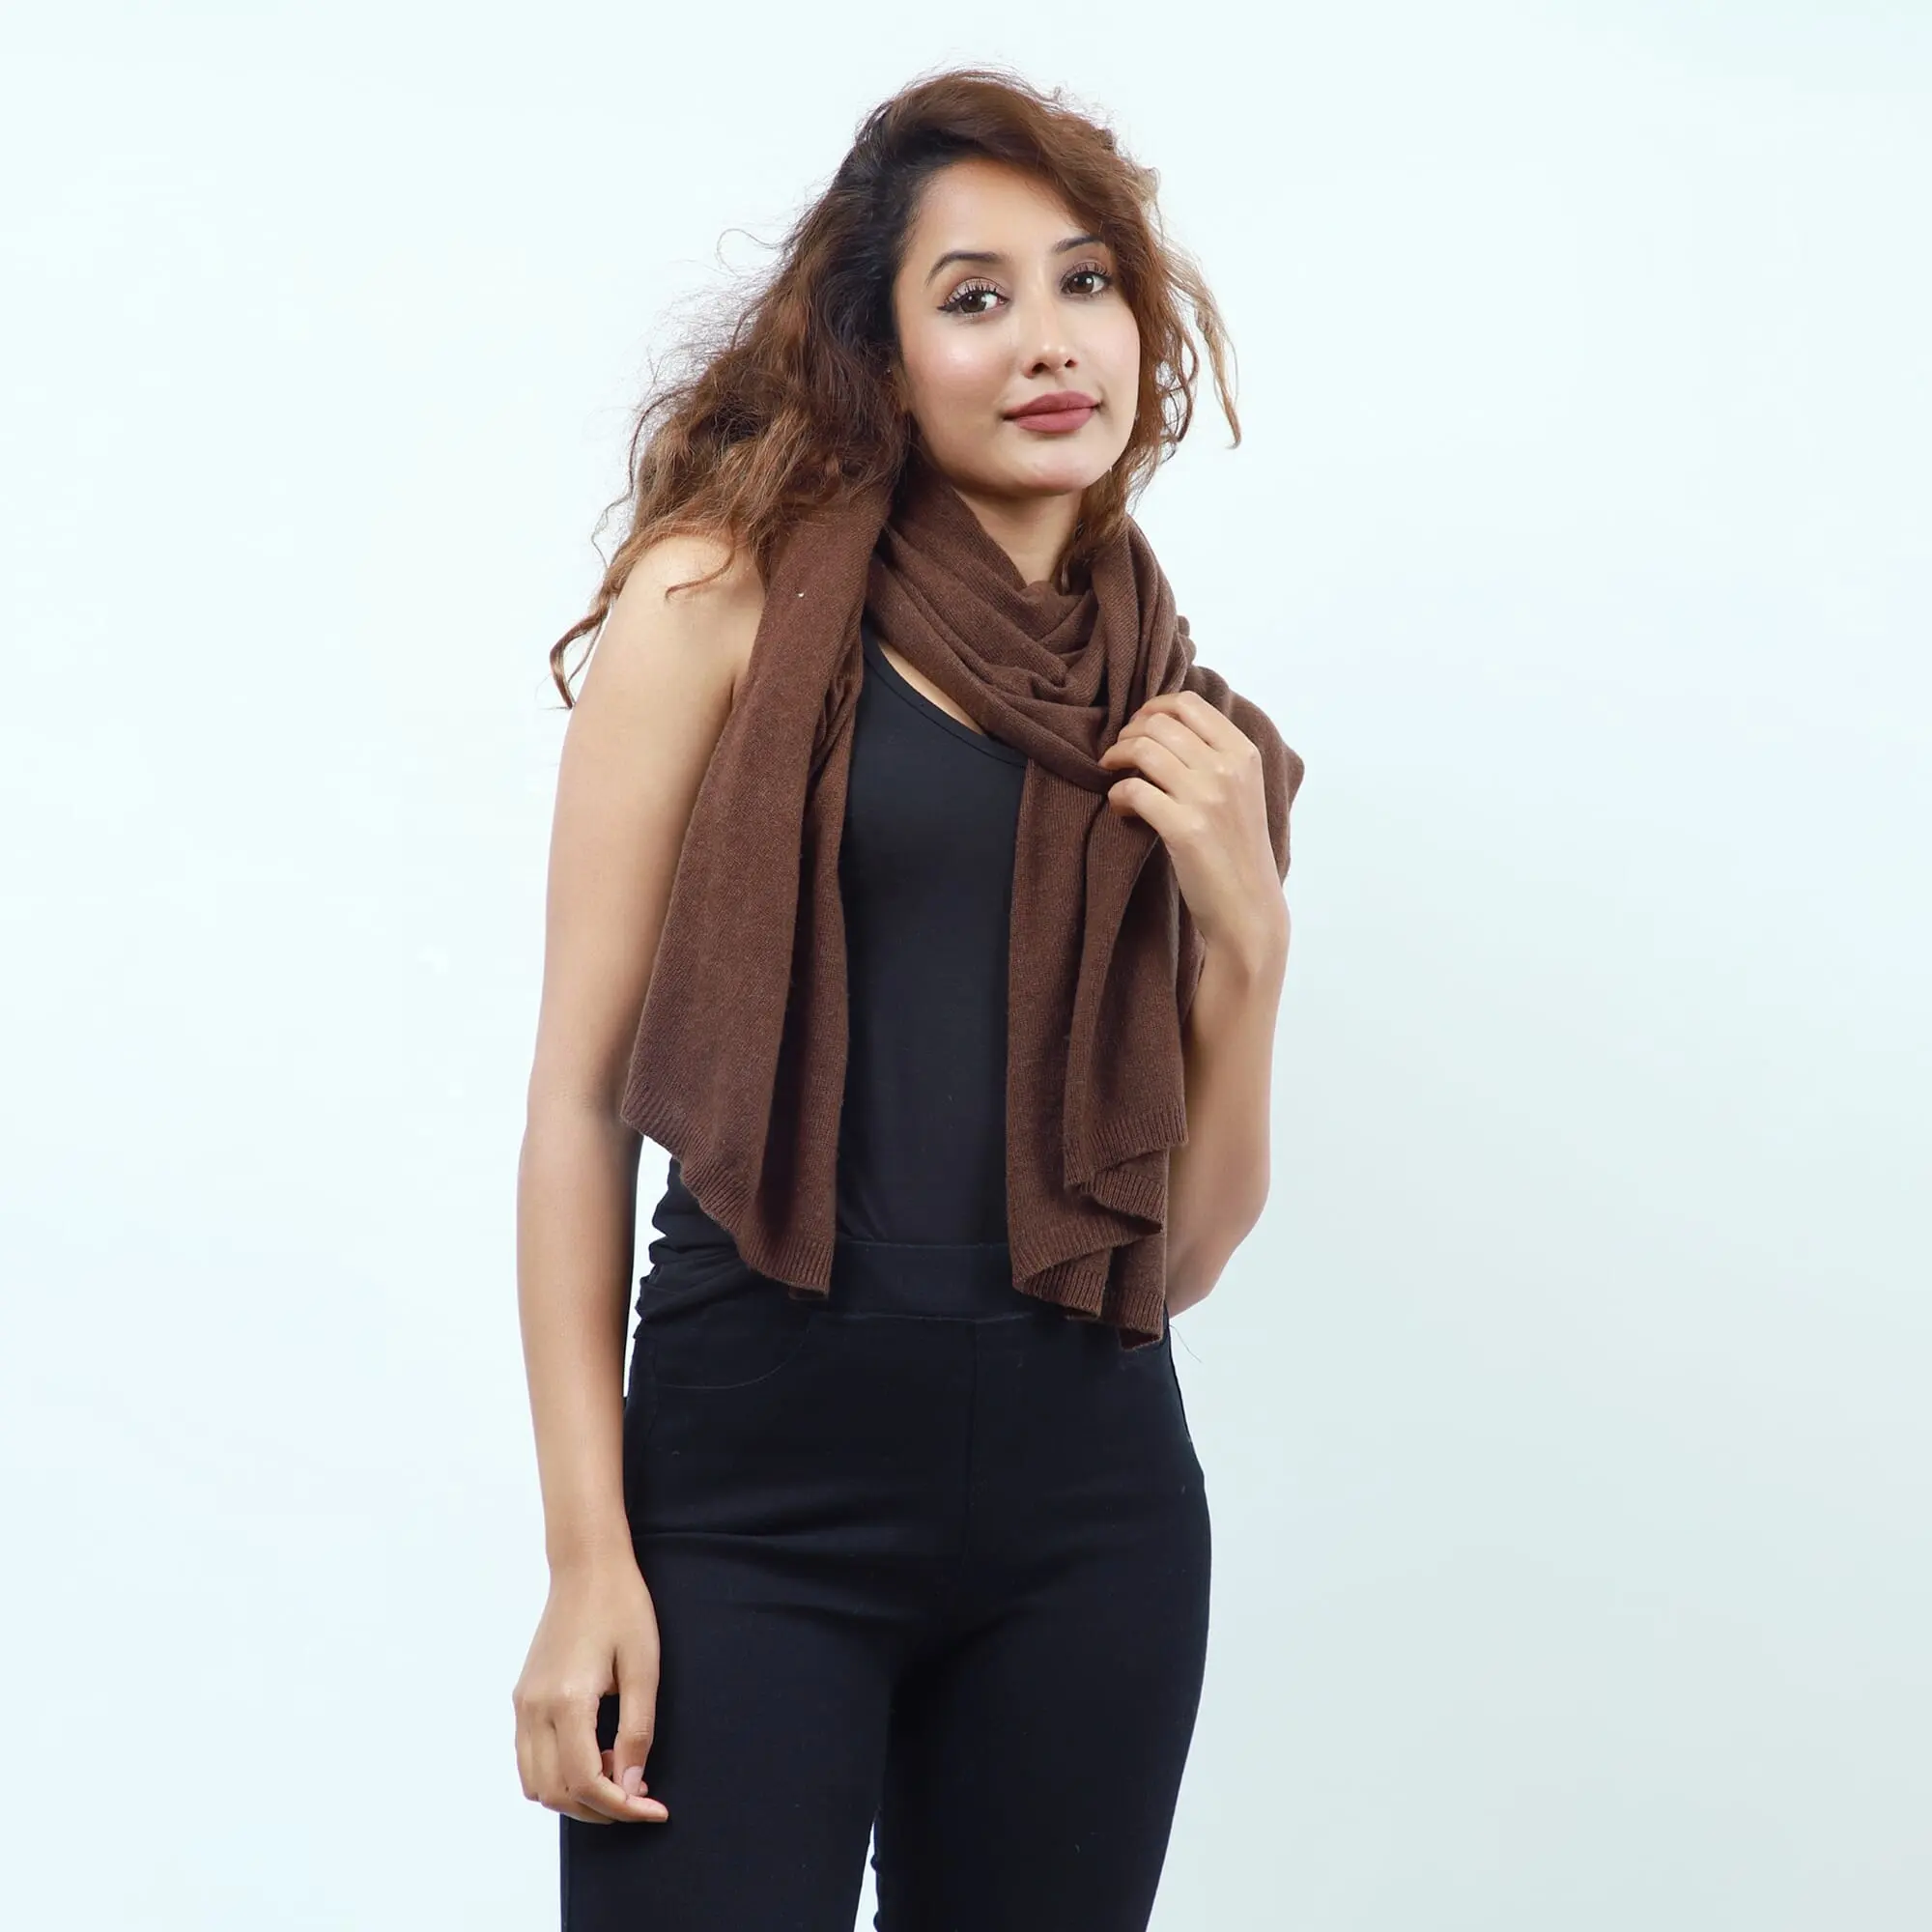 100% Plain Rib Knitted Shawl/Scarf Soft Sustainable Cashmere Style & Stylish Special Women's Fine Wear Winter Warm Fashionable